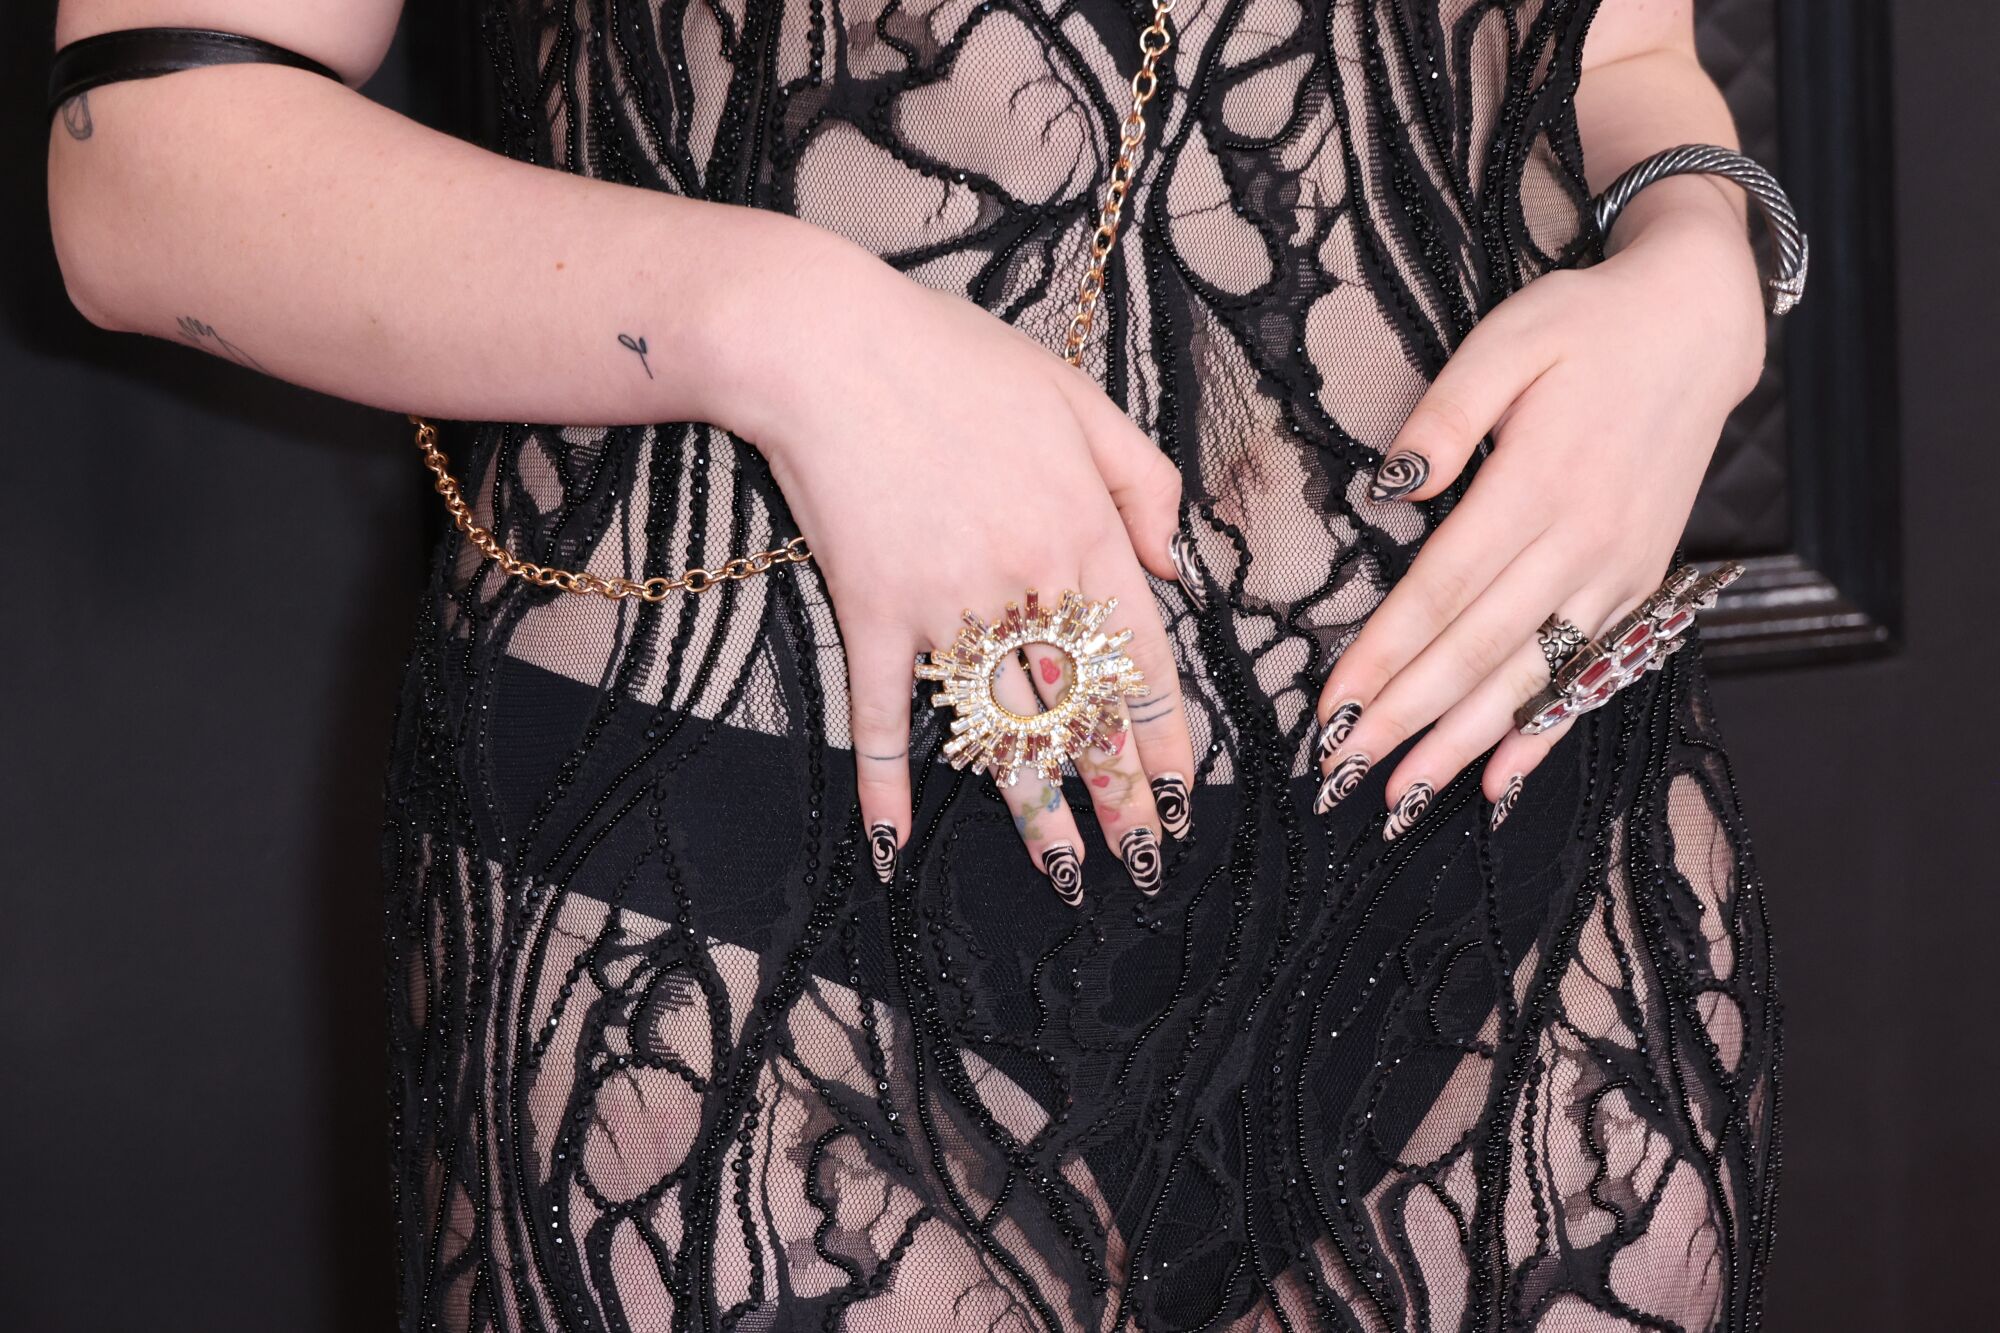 A torso covered in black and see through patterned mesh and hands with elaborate rings and fingernail polish.